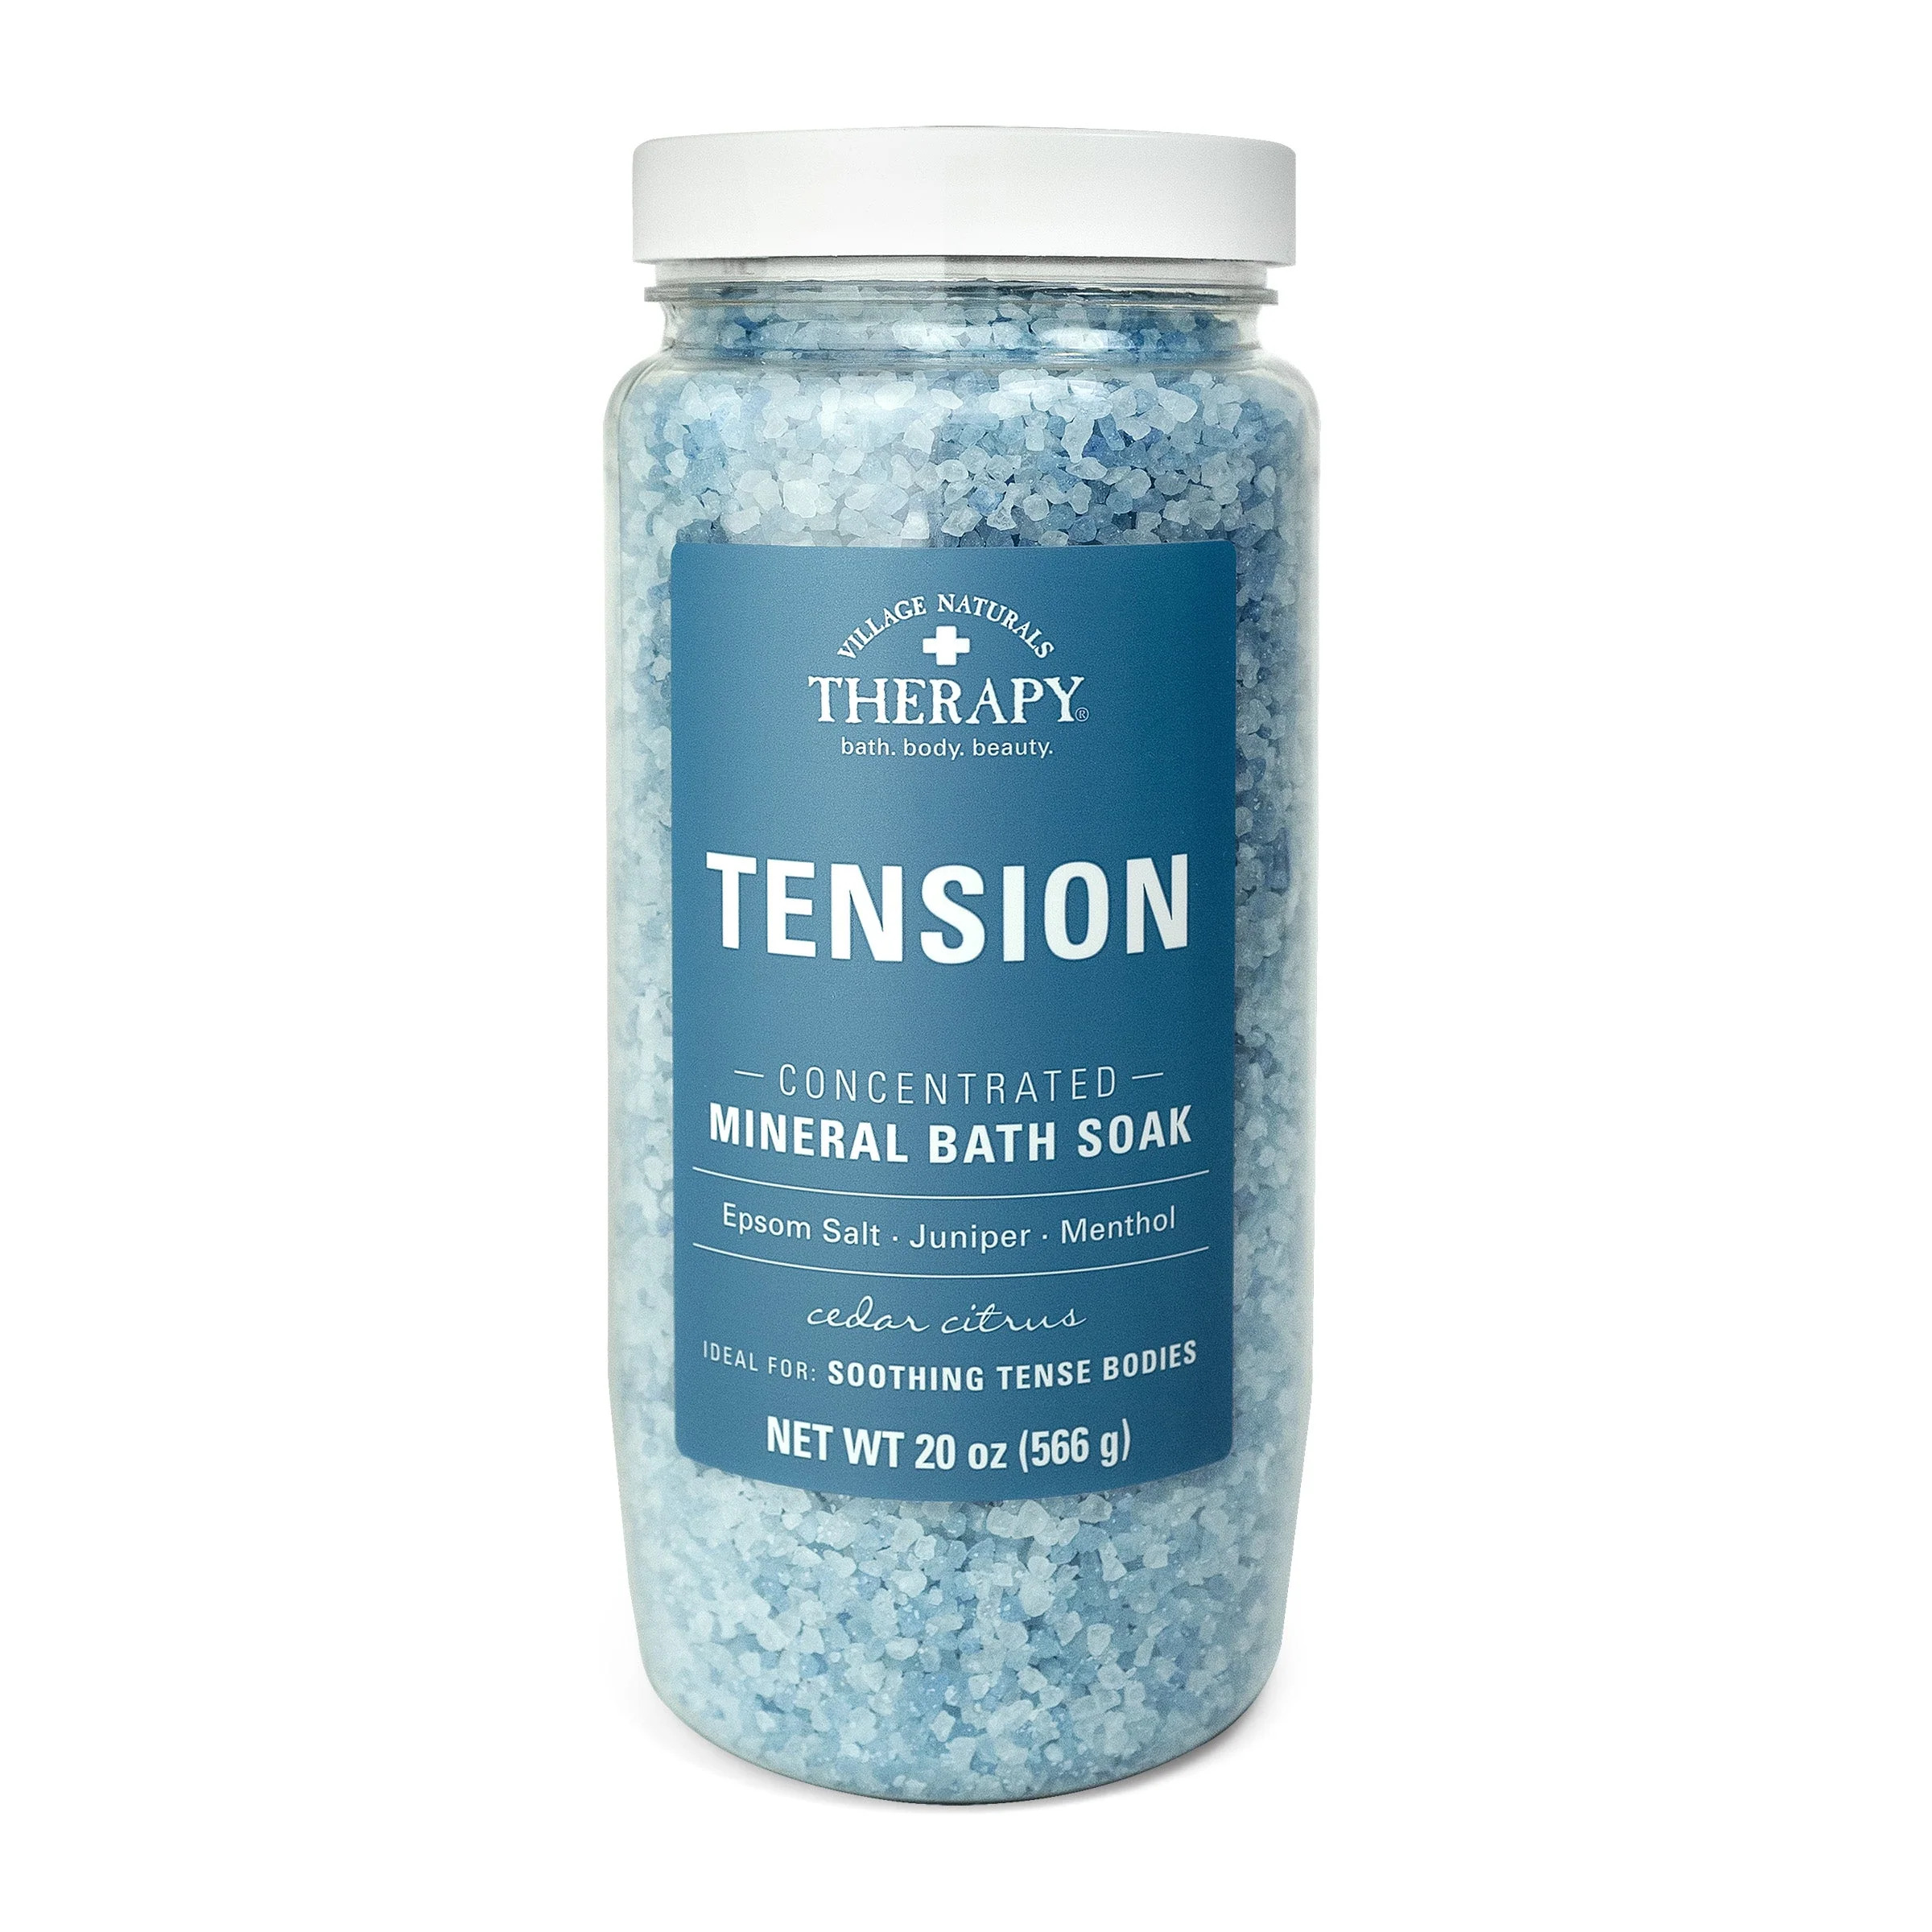 Village Naturals Therapy Tension Relief Concentrated Mineral Bath Soak, 20 oz - image 1 of 10